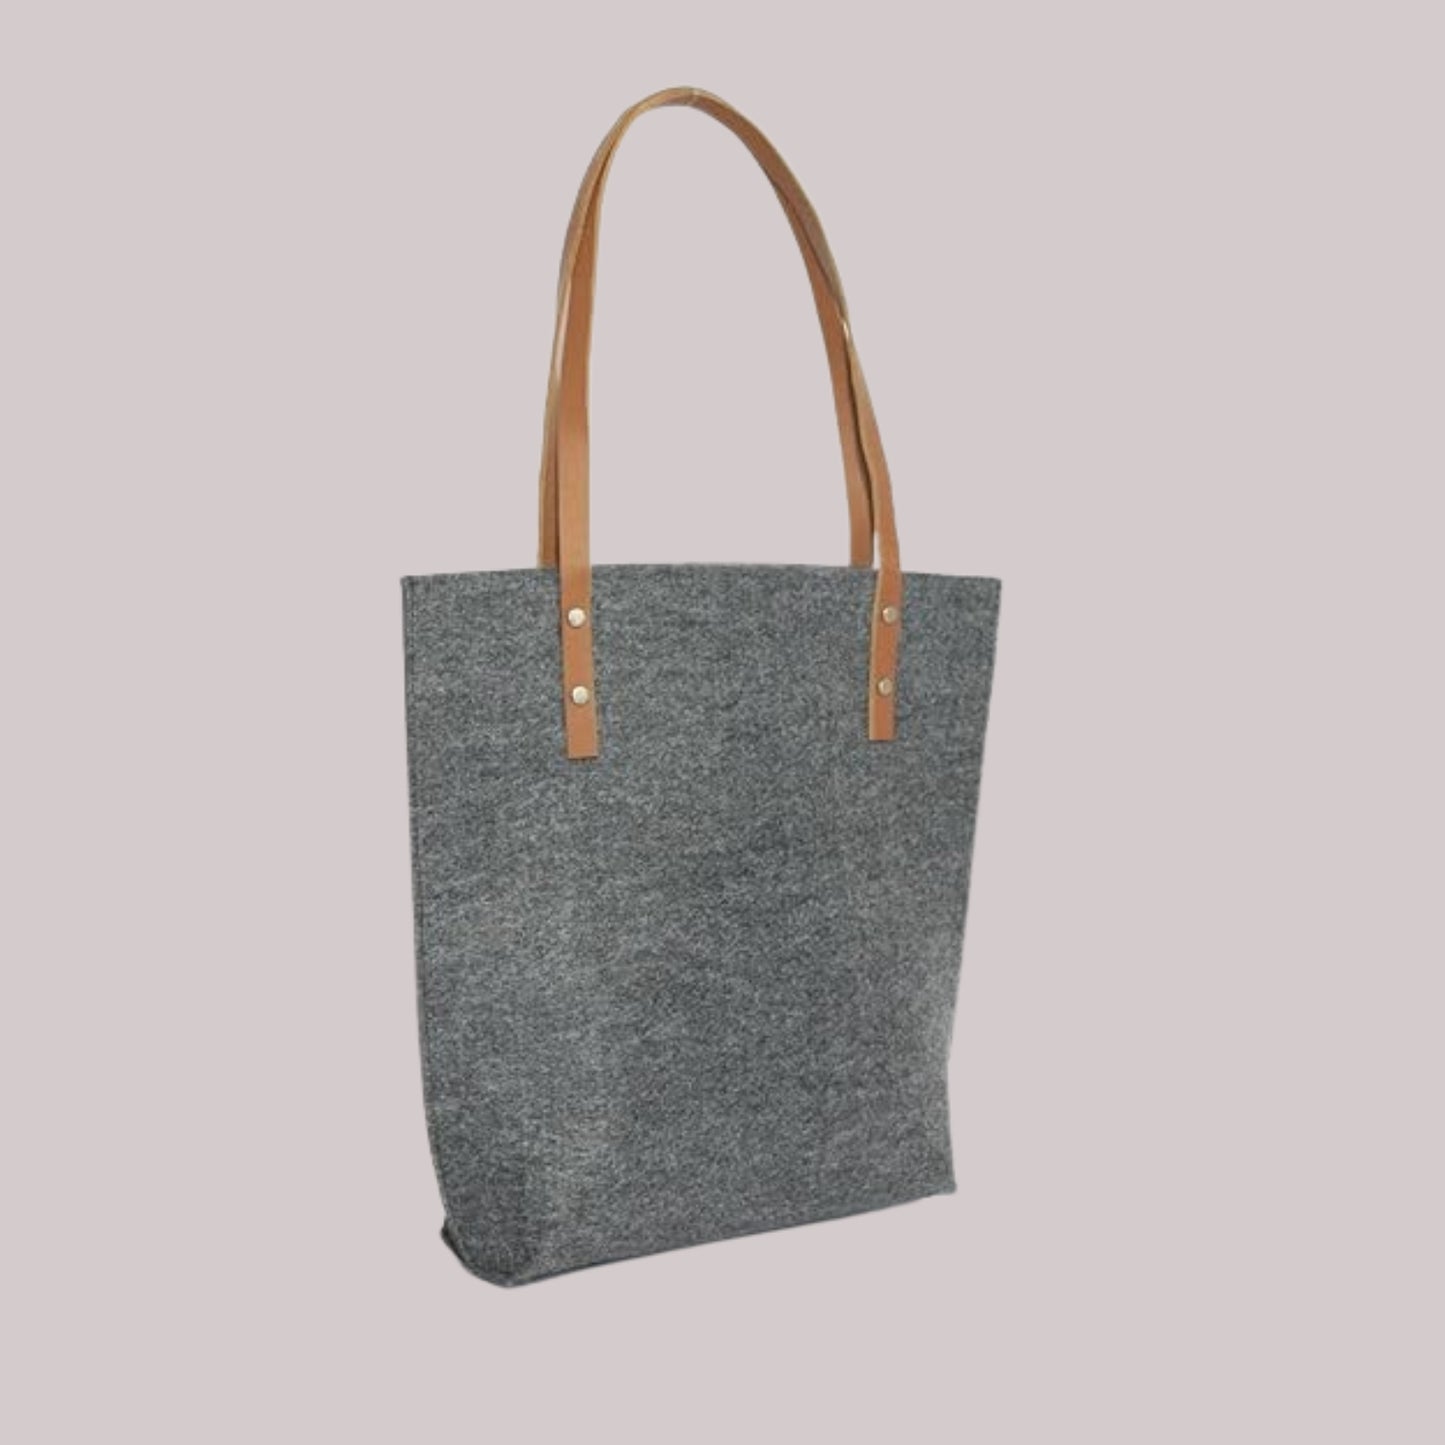 TIERNO Women's Tote Bag - Stylish & Trendy - Daily Carry